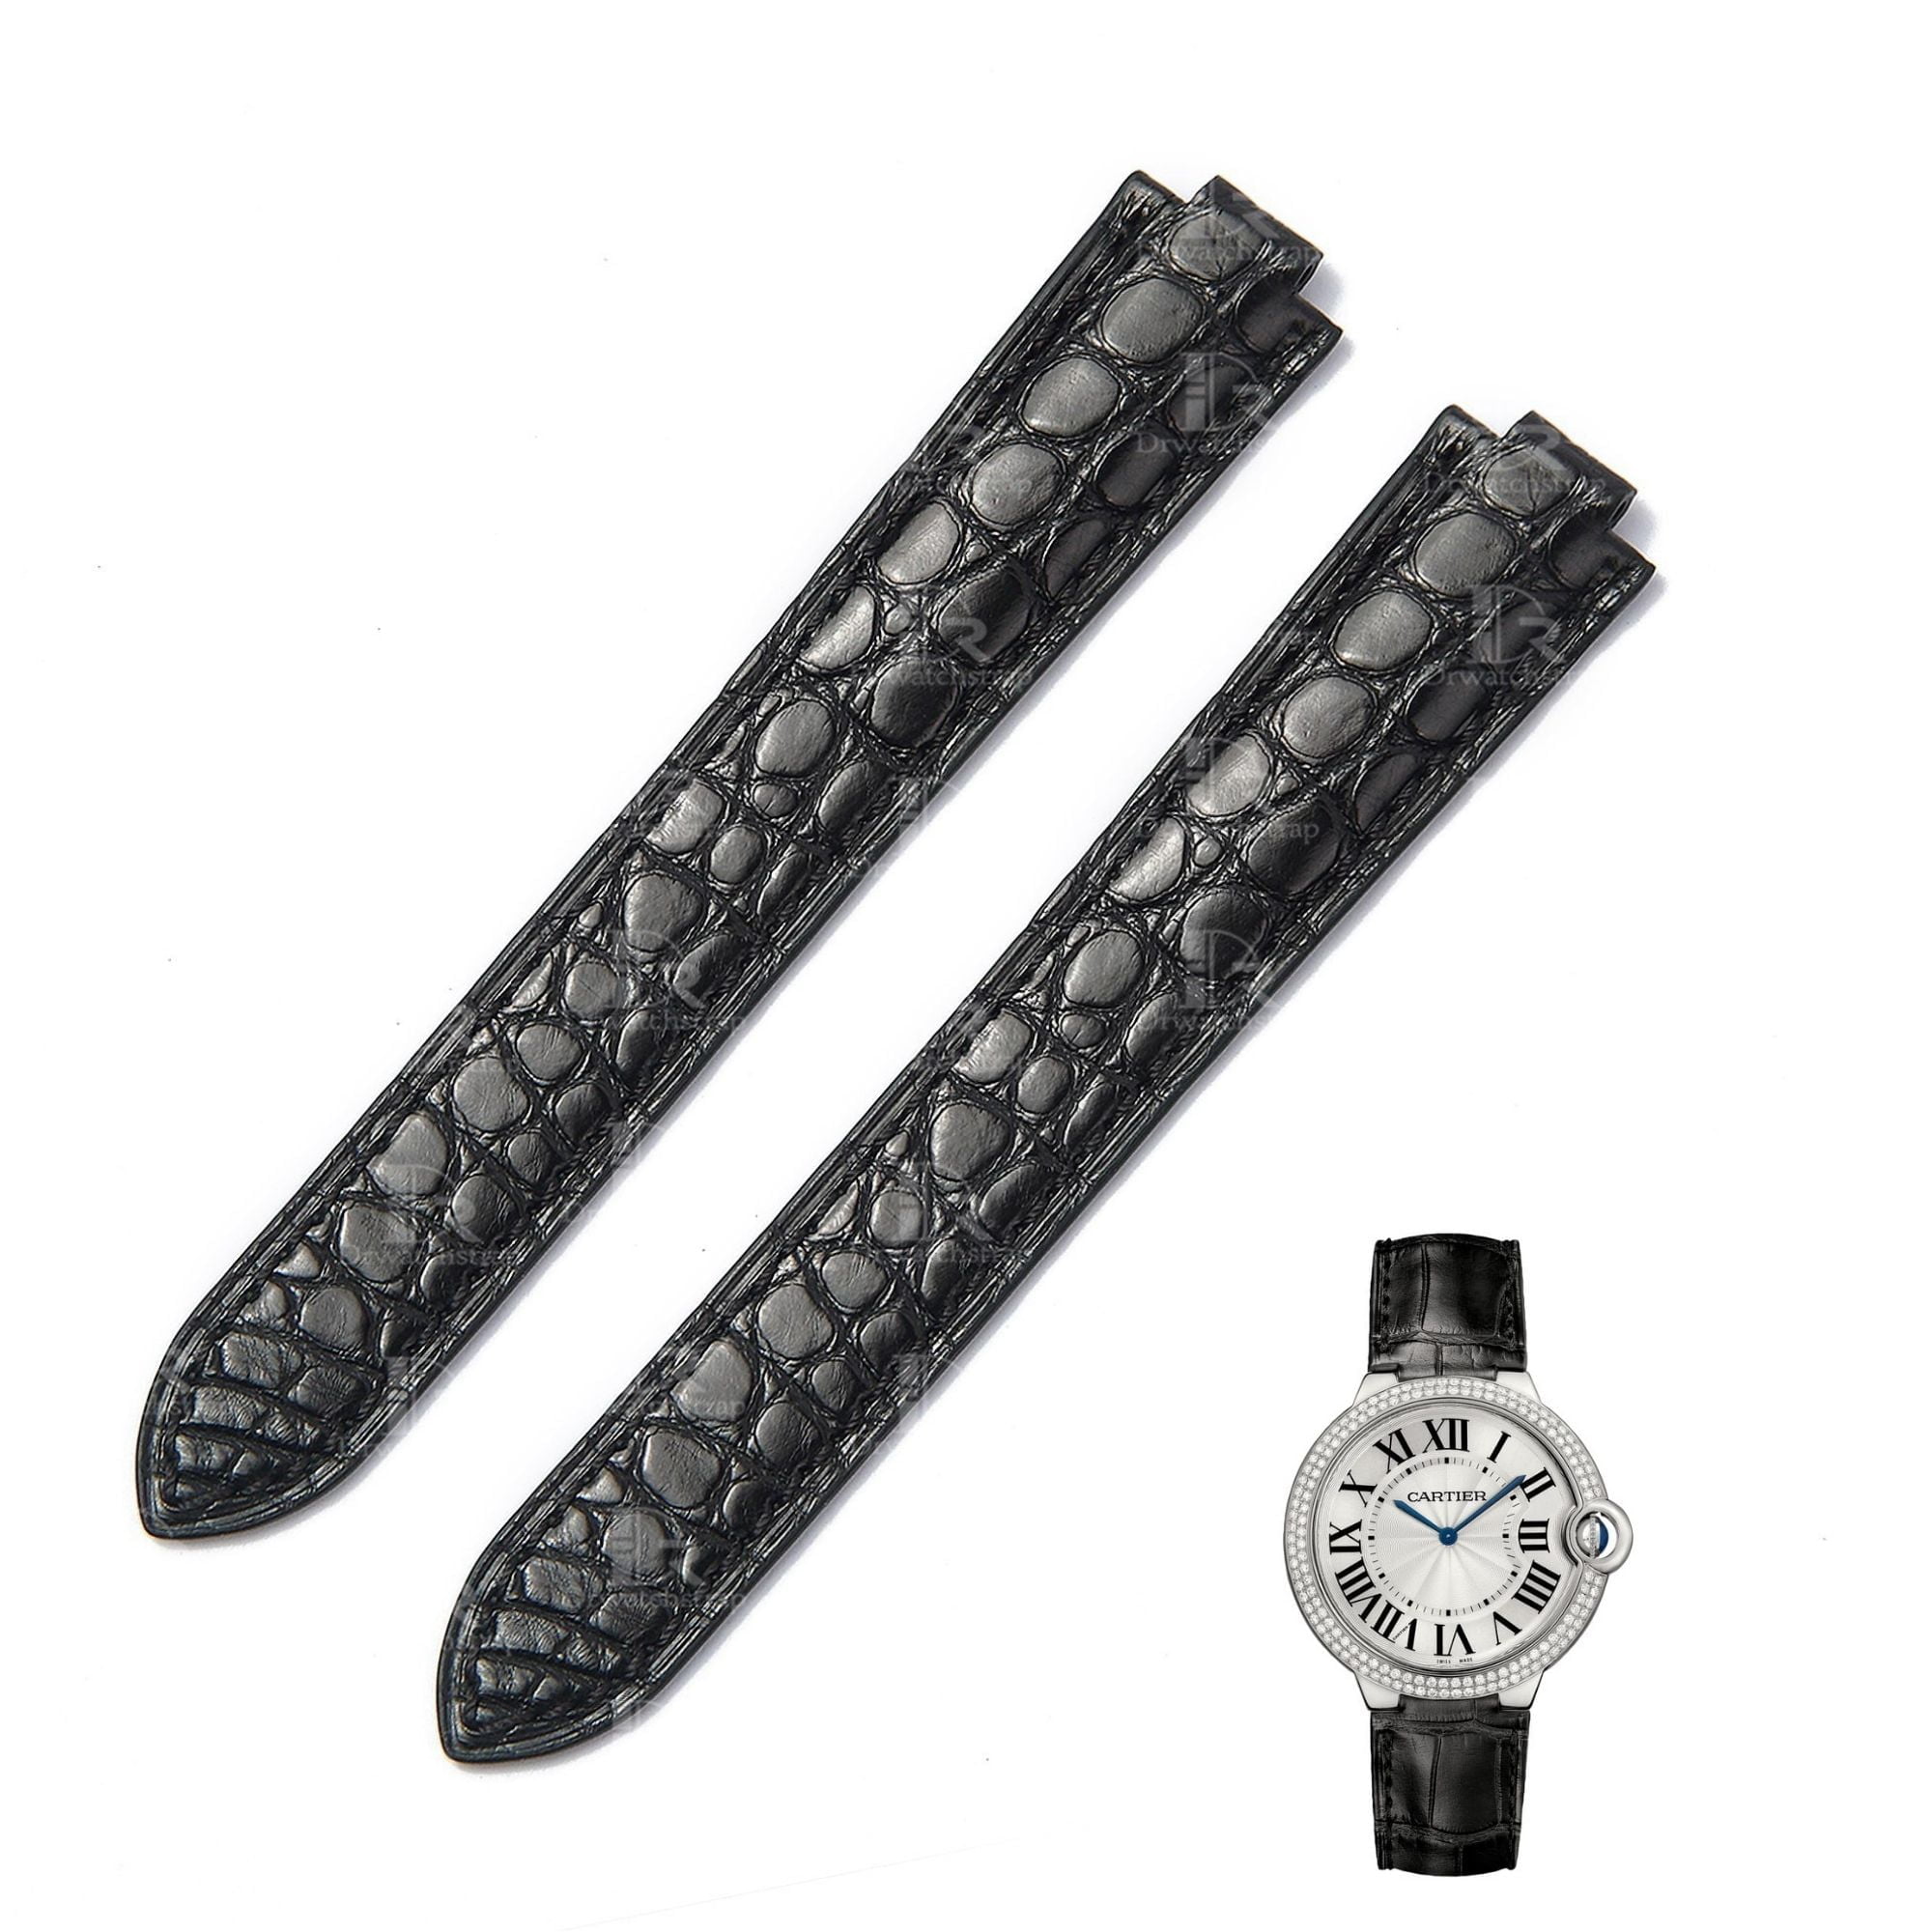 The genuine best quality OEM handmade Grade A level American Alligator Crocodile black roubd-scale Cartier leather watch strap and watch band replacement for Cartier Ballon Bleu de luxyry watches online - Shop the OEM custom straps and watchbands from dr watchstrap at a low price